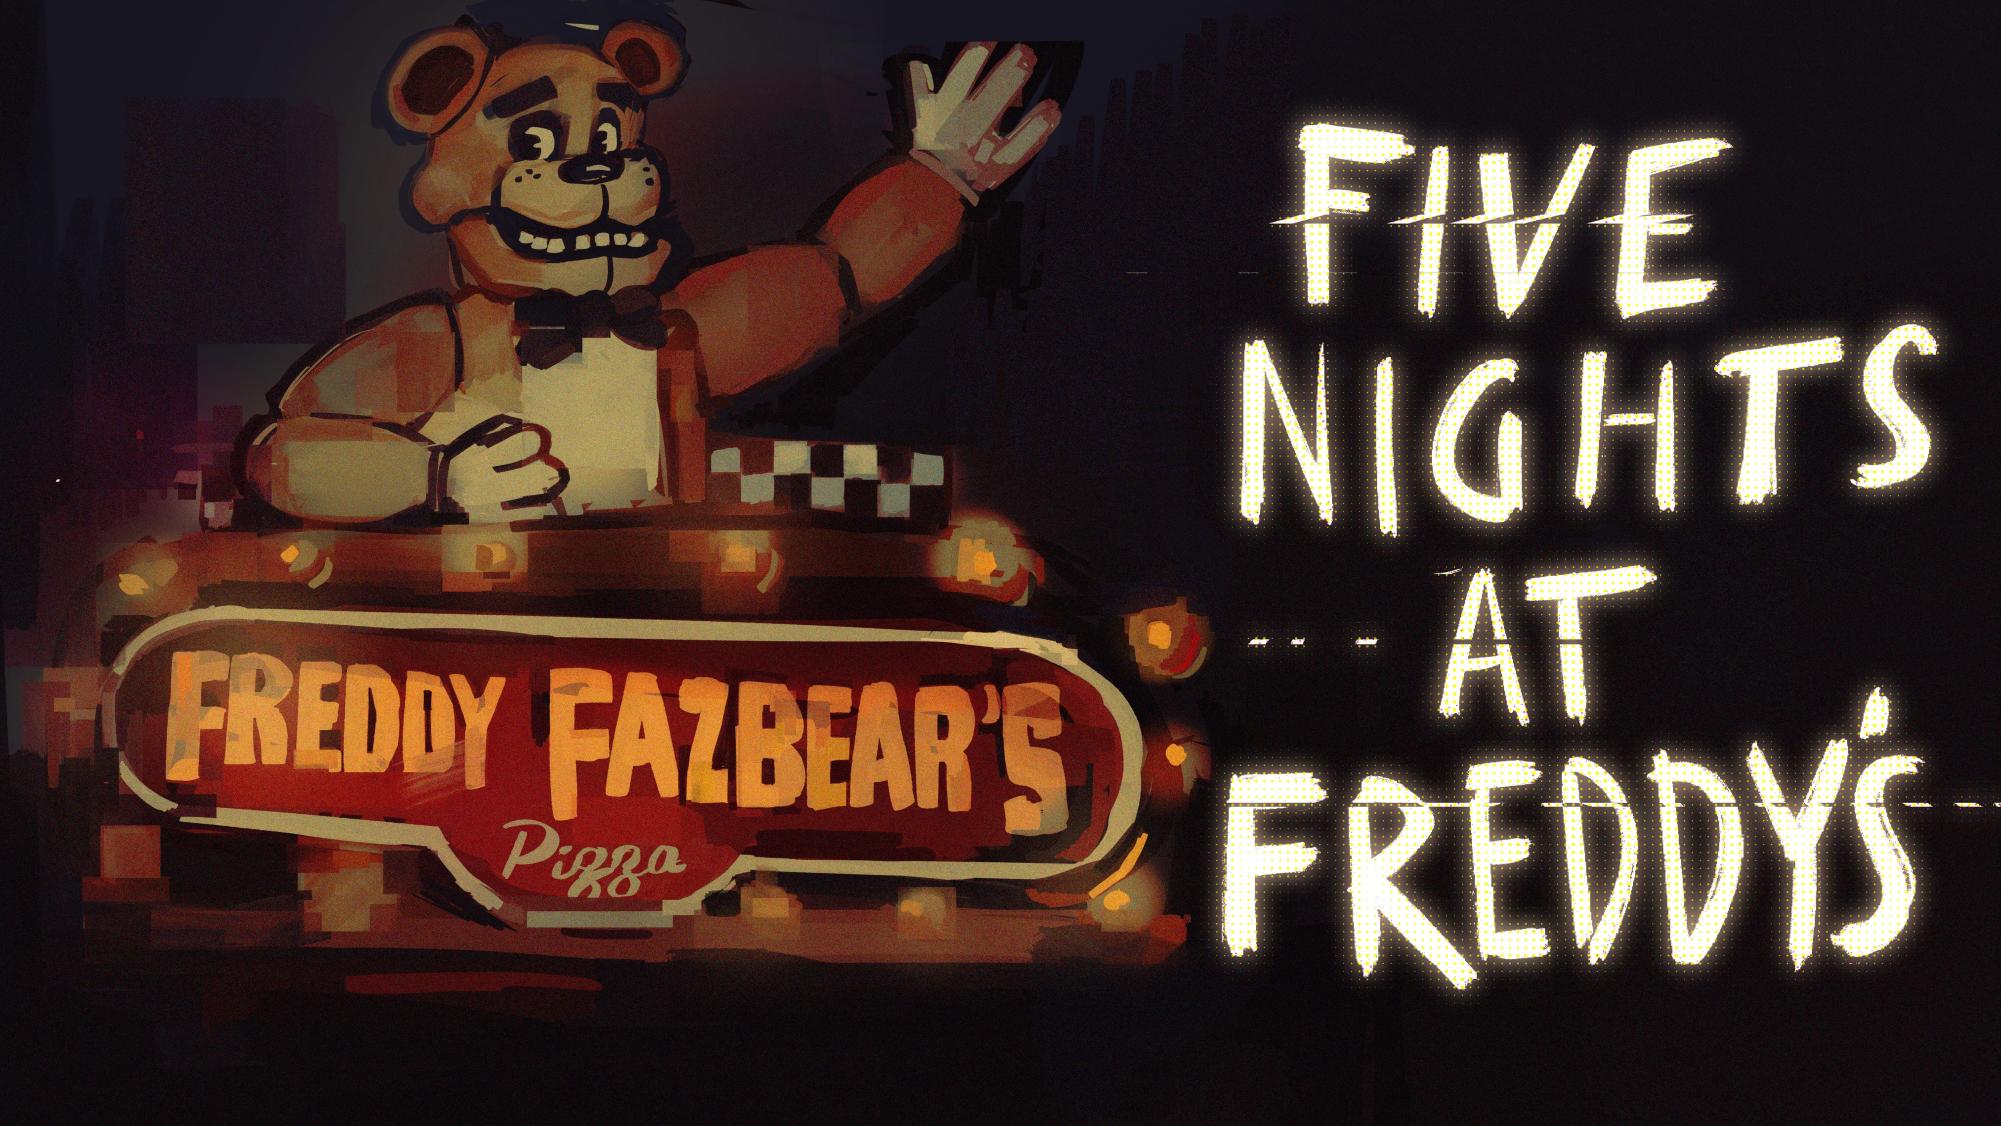 REVIEW | Looking for something to stream over Thanksgiving? “Five Nights at Freddys” is a solid choice